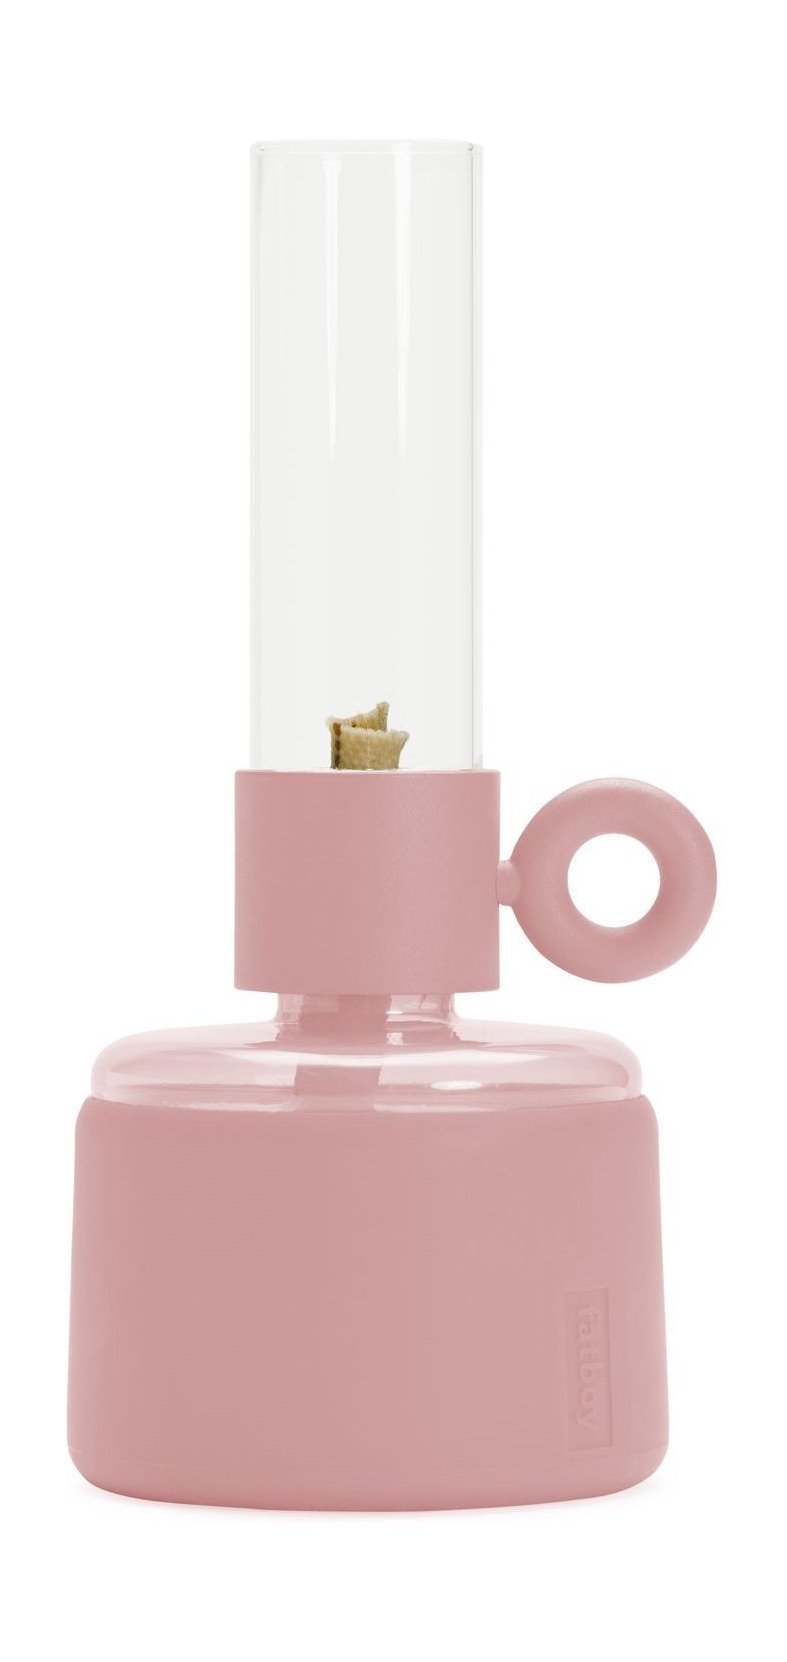 Fatboy Flamtastique Xs Oil Lamp, Cheeky Pink